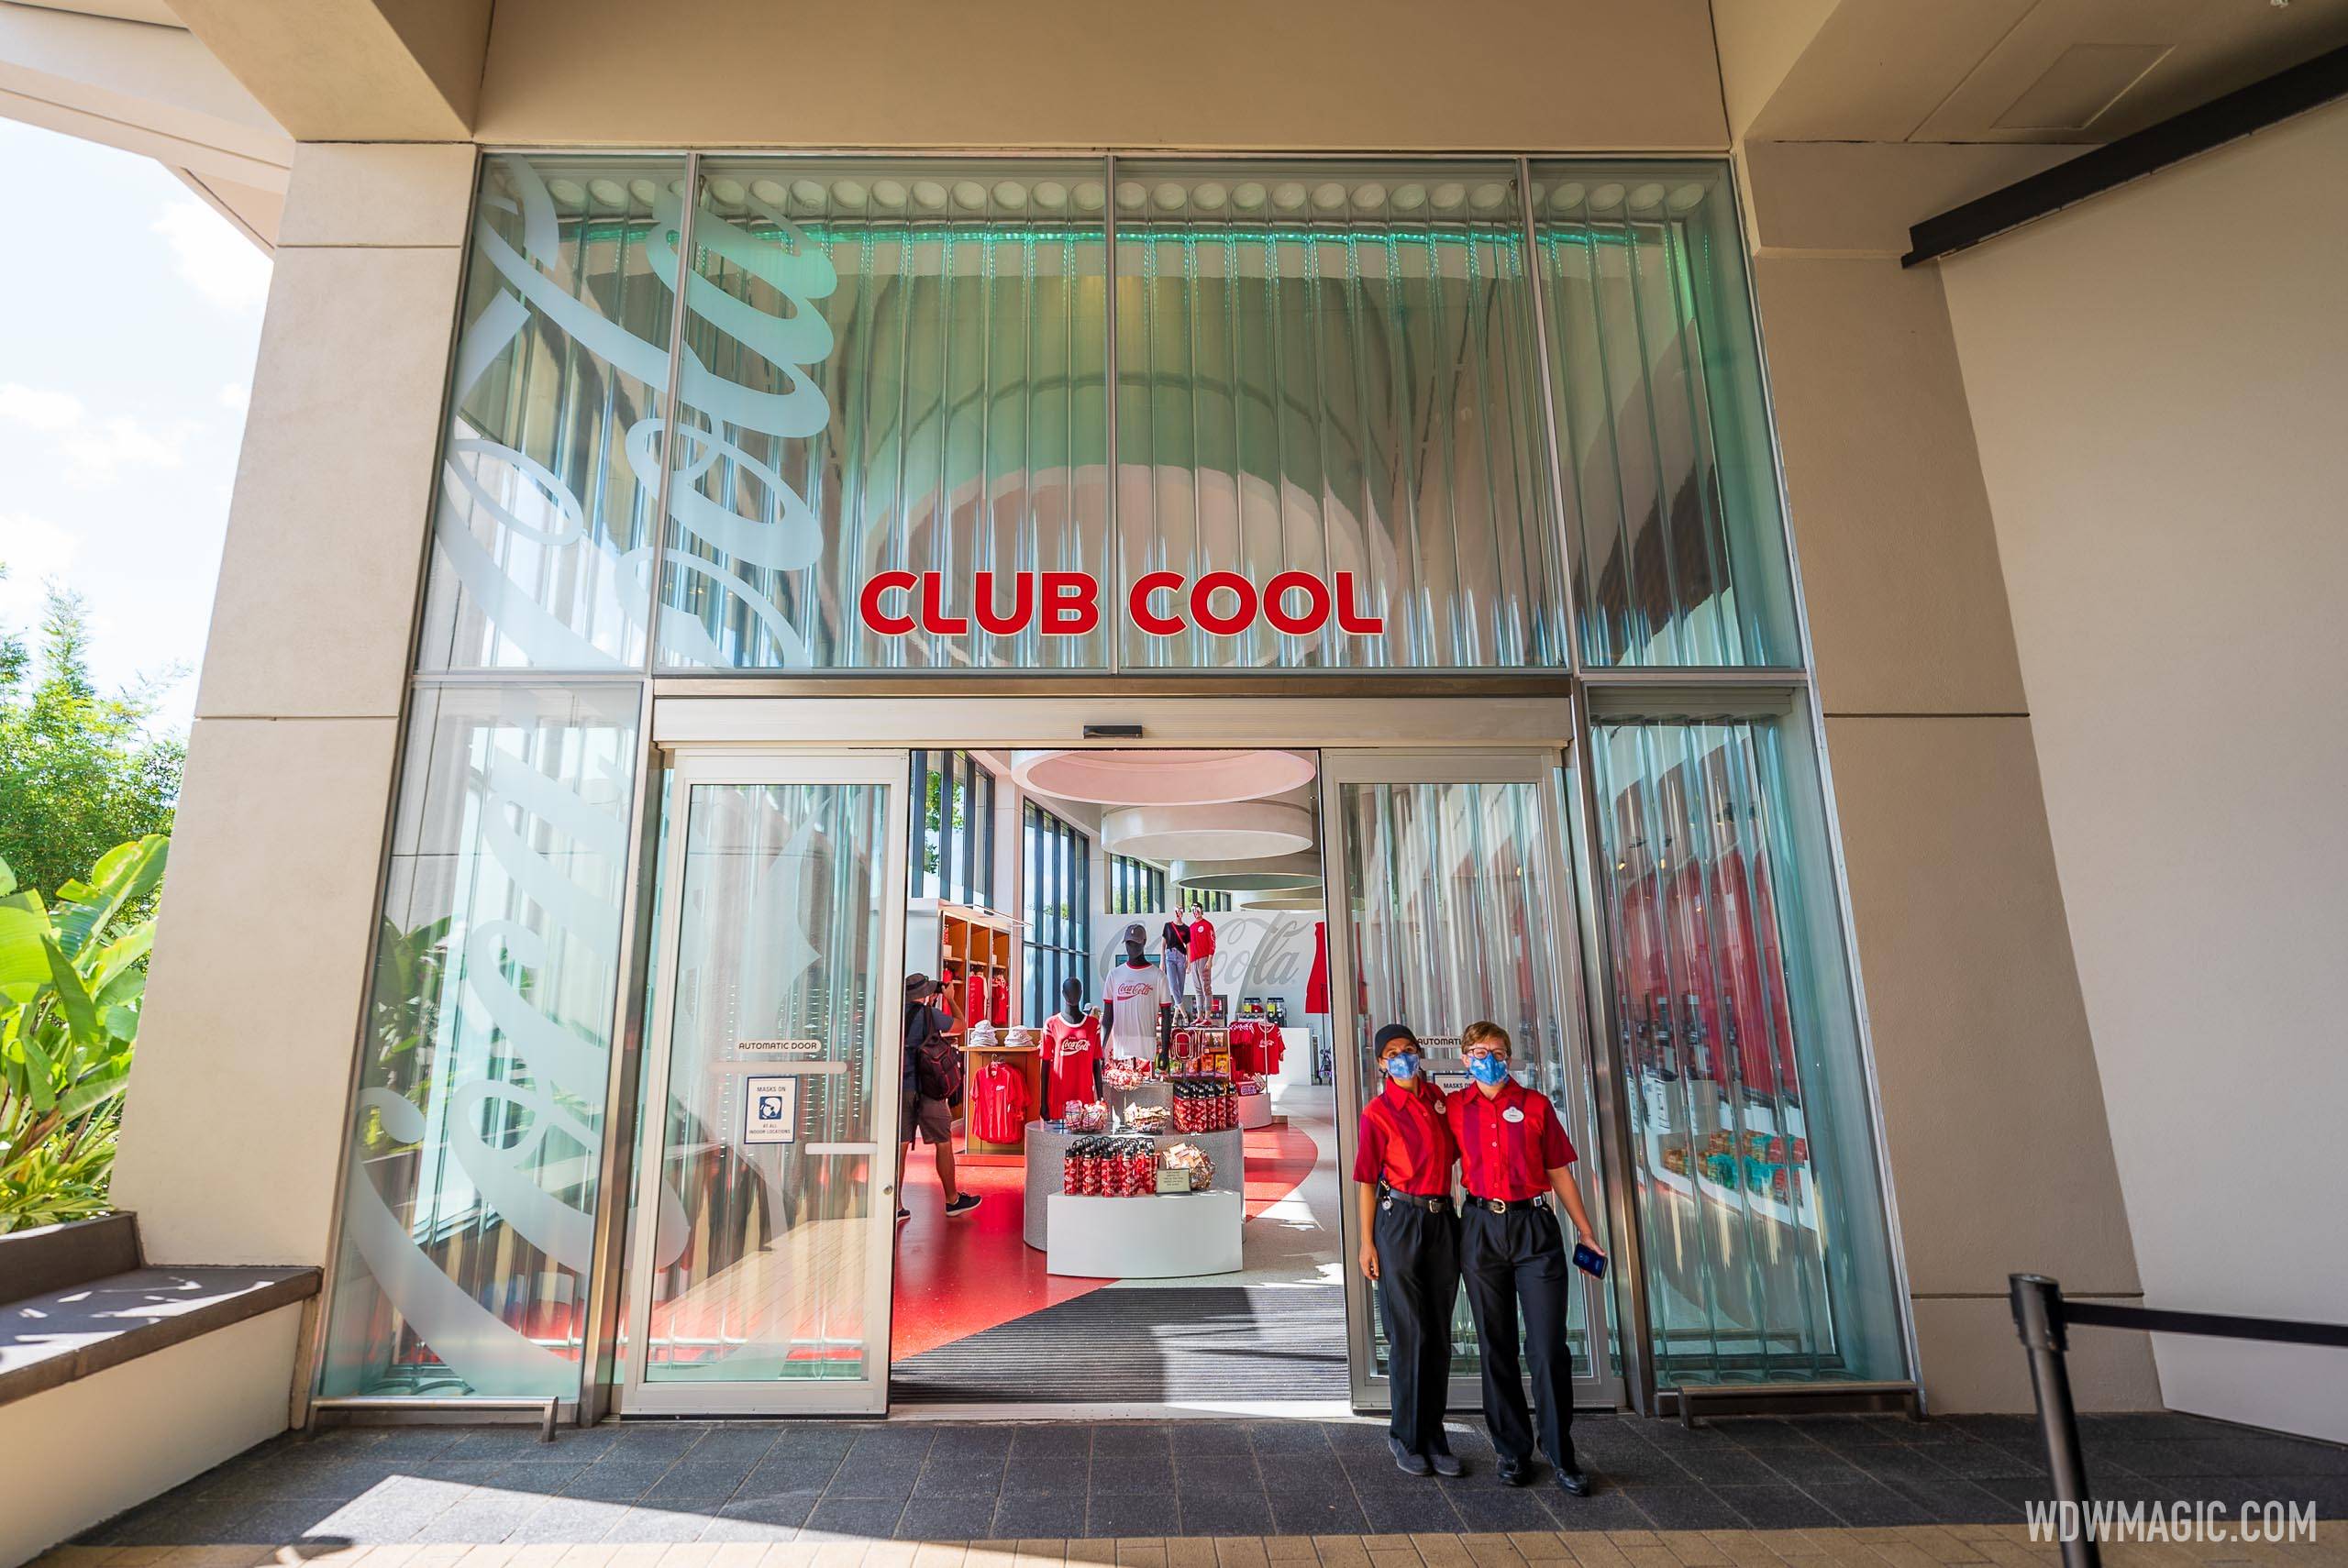 EPCOT'S brand new Club Cool now open at Walt Disney World